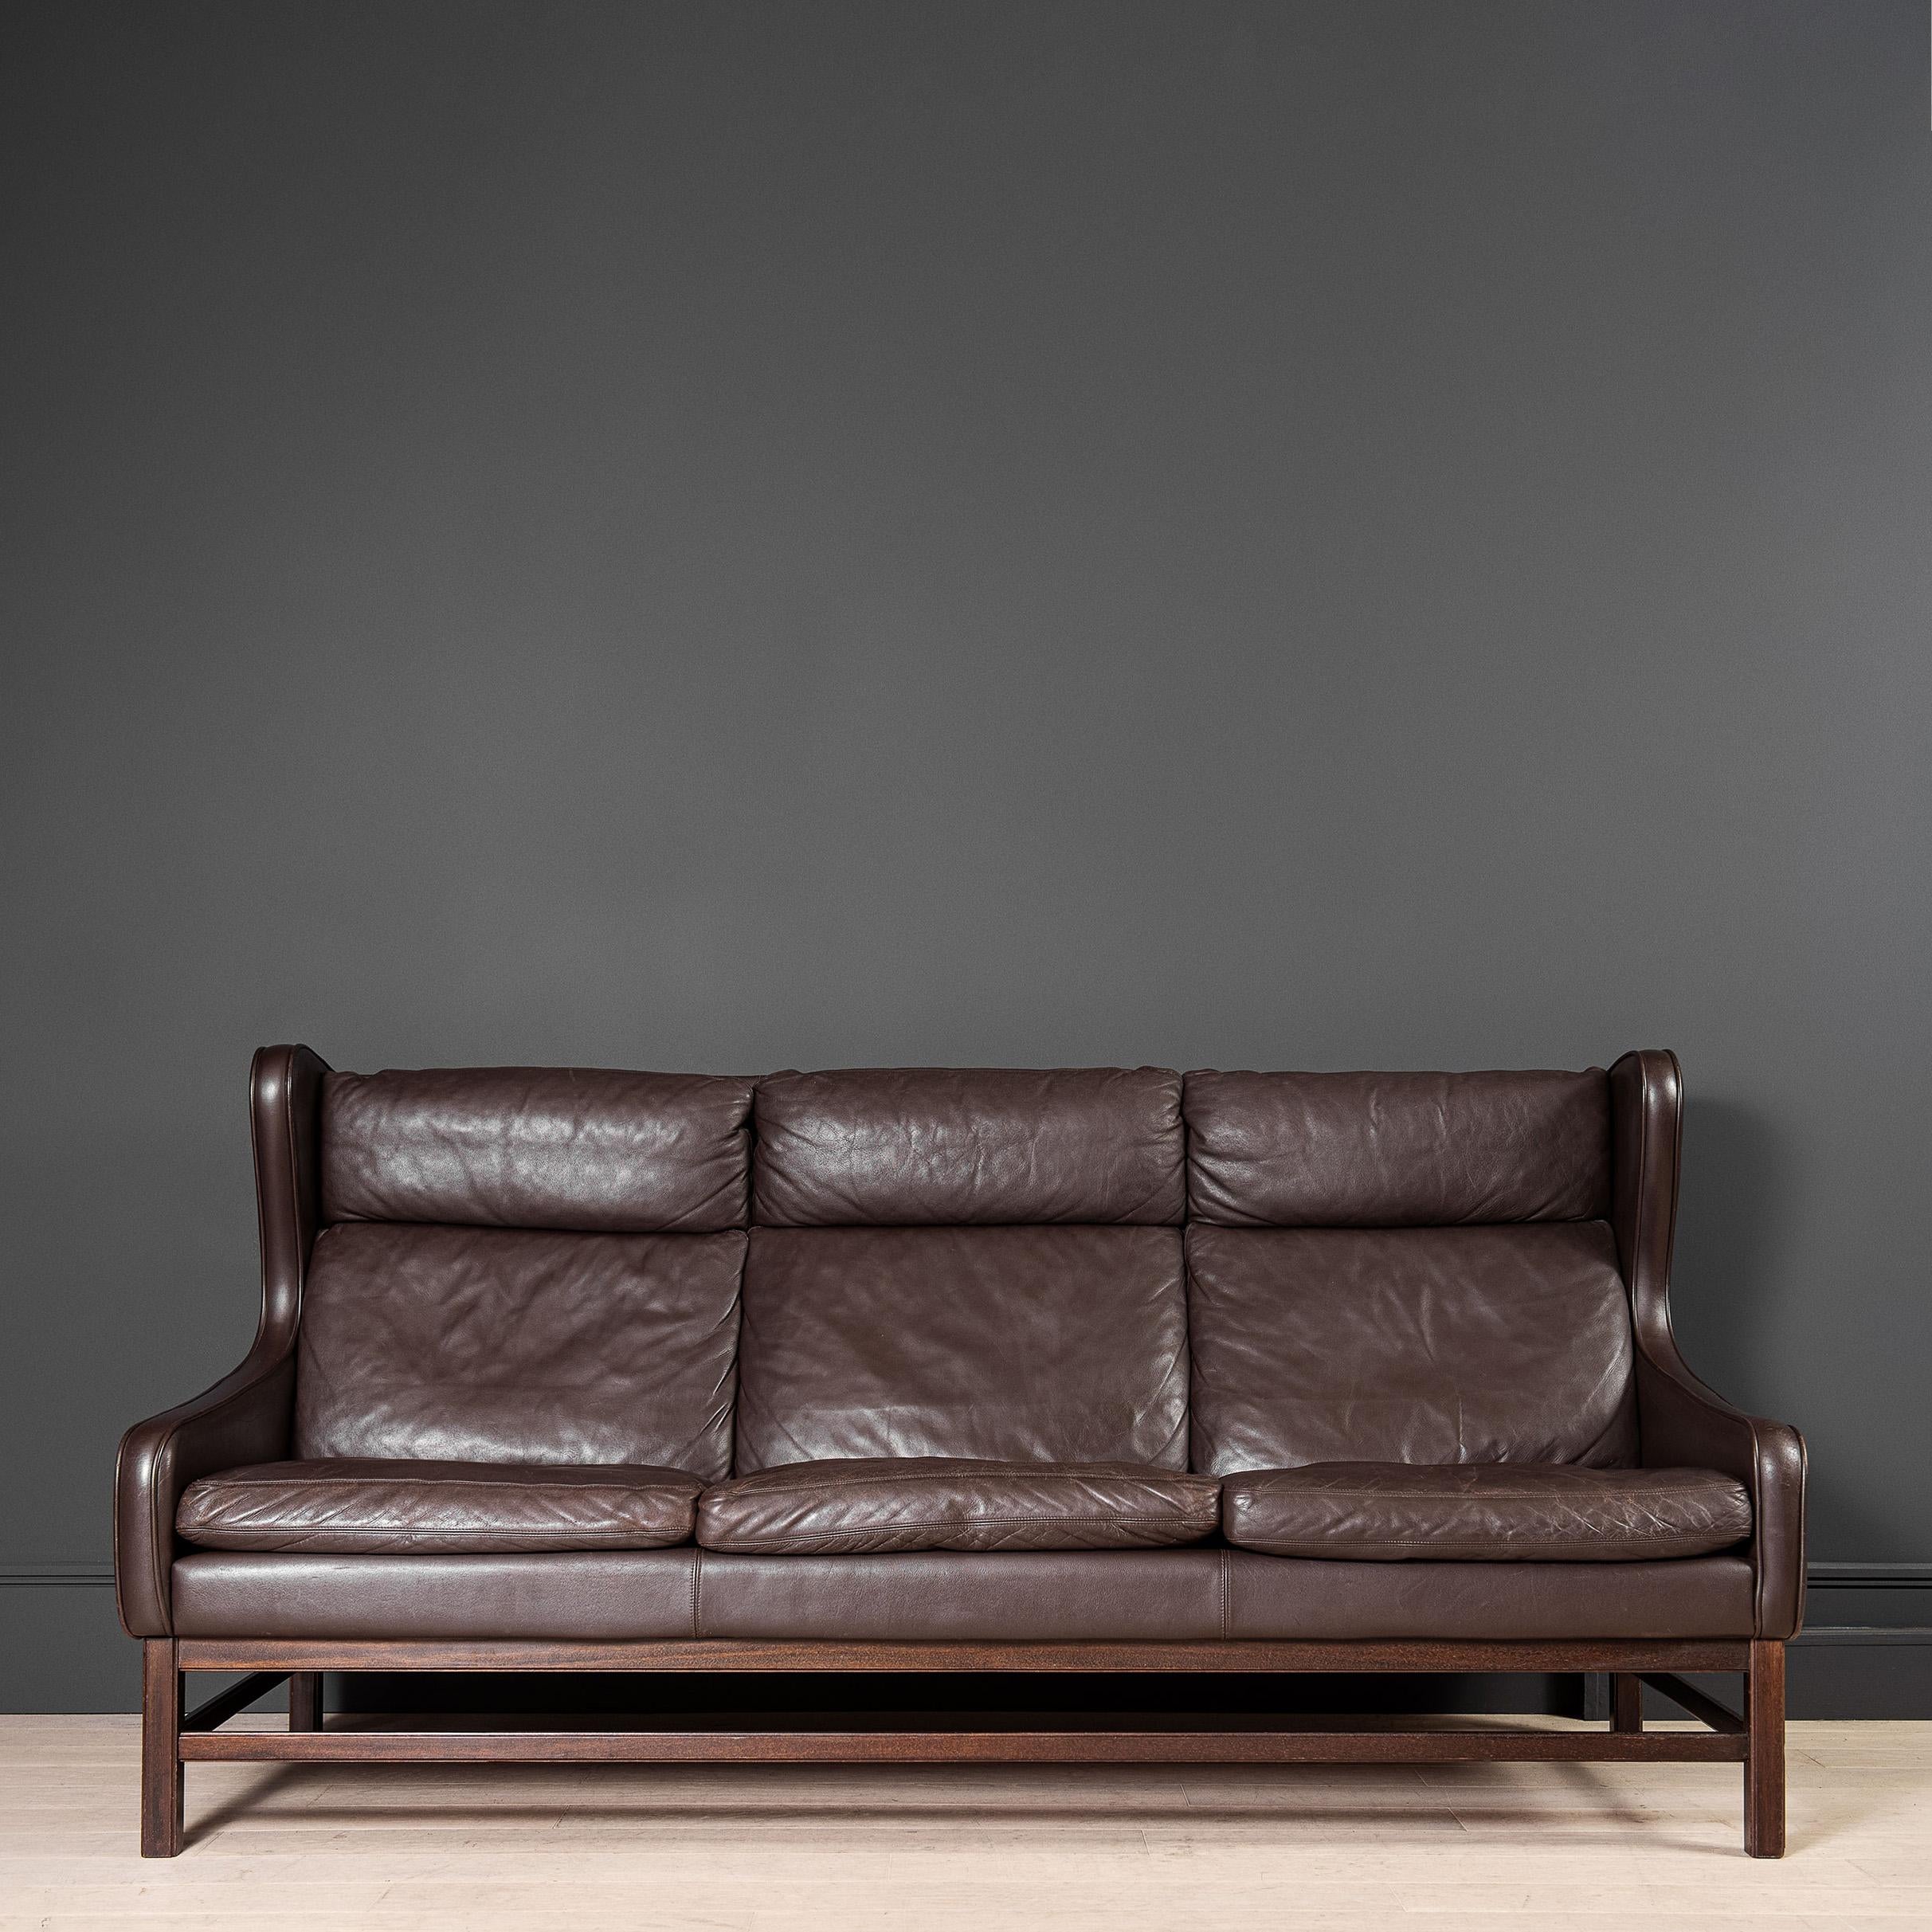 A 3 seater dark brown leather wing-back sofa. Produced in Denmark during the 1960's. This is a substantial piece and rather unusual in its design - akin to Borge Mogensen. Down filled cushions make for an extremely comfortable piece of furniture.
